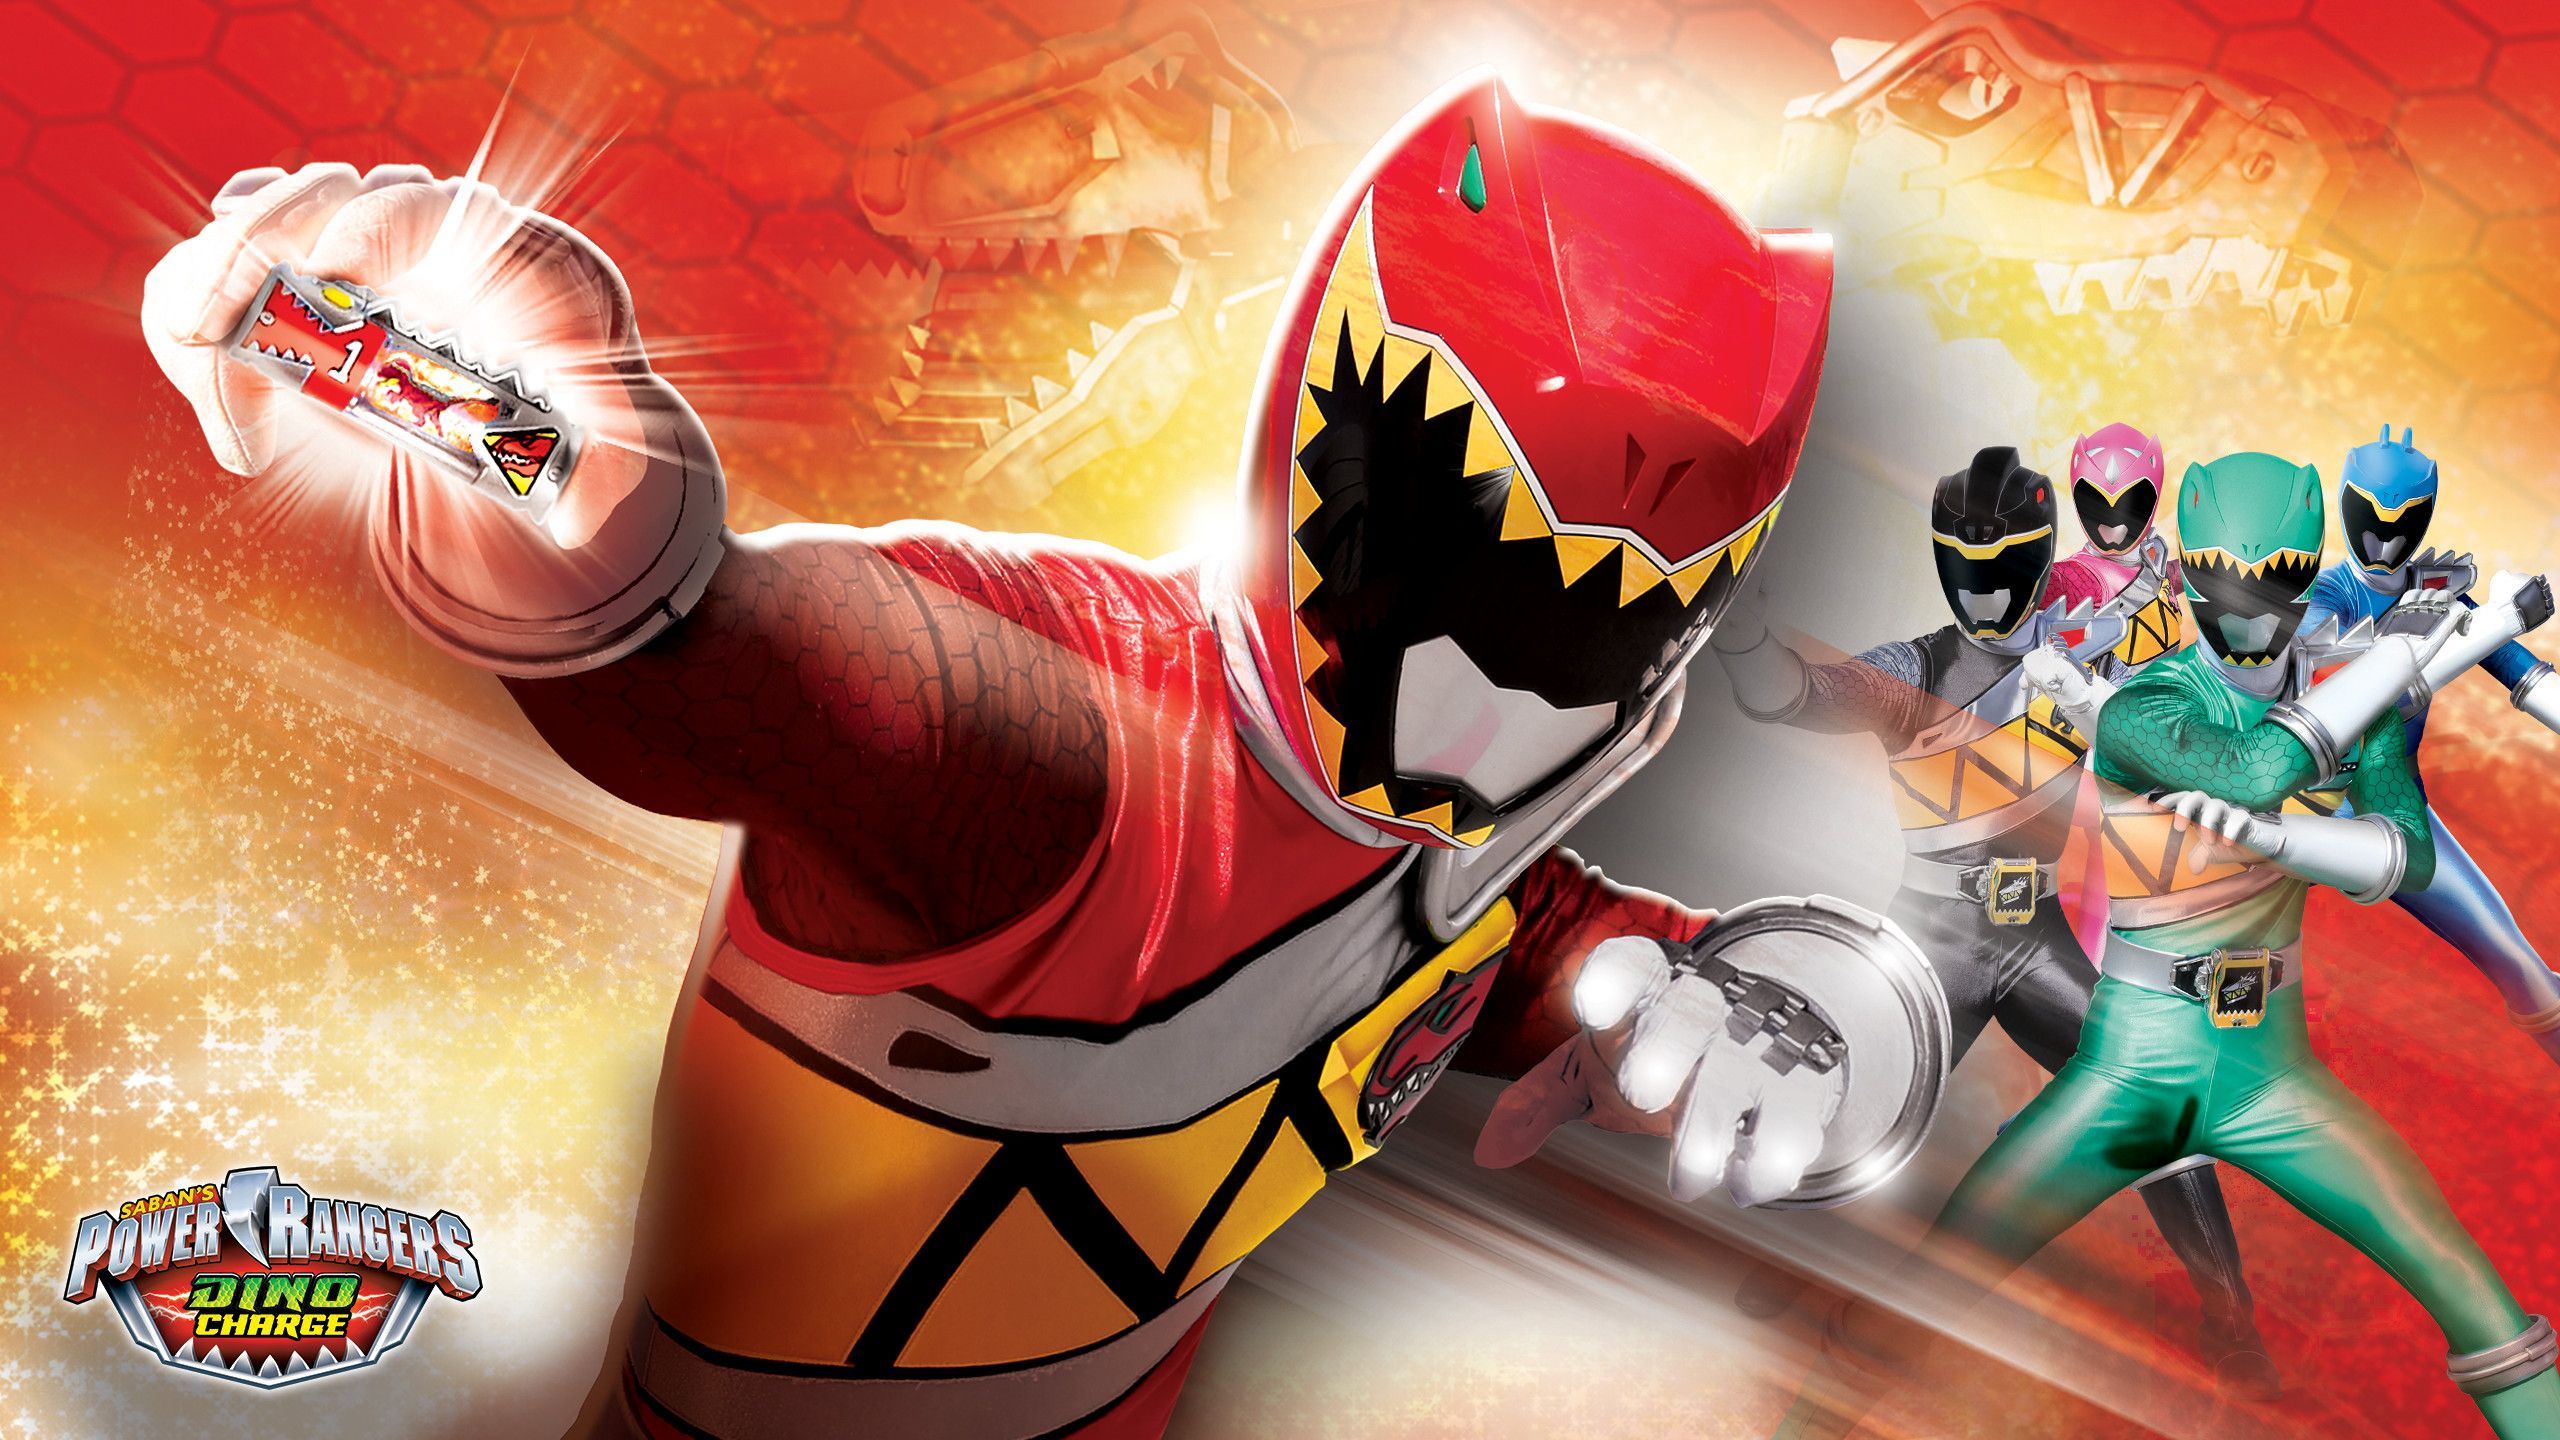 Power Rangers Dino Charge Wallpaper Free Power Rangers Dino Charge Background